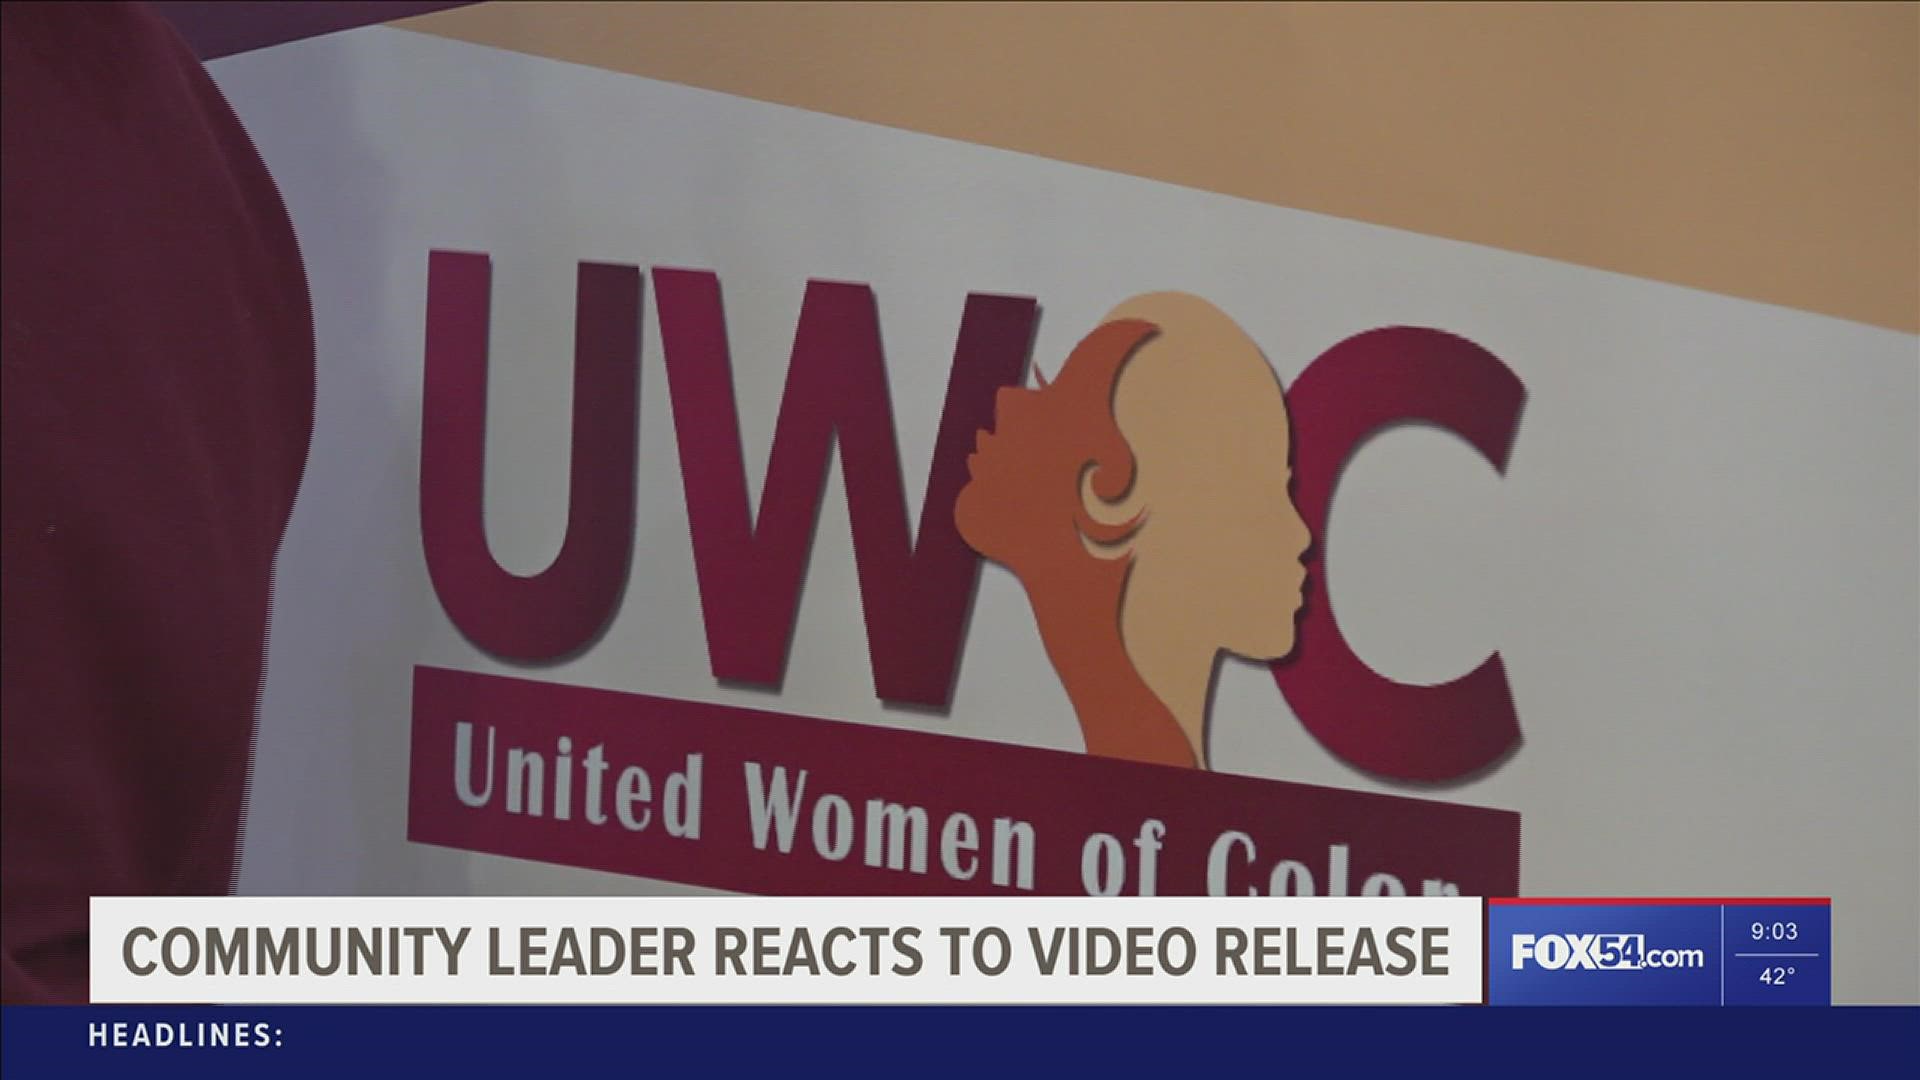 Angela Curry, ED of nonprofit United Women of Color, says the quick release of this footage allows public access to information as it relates to public safety.